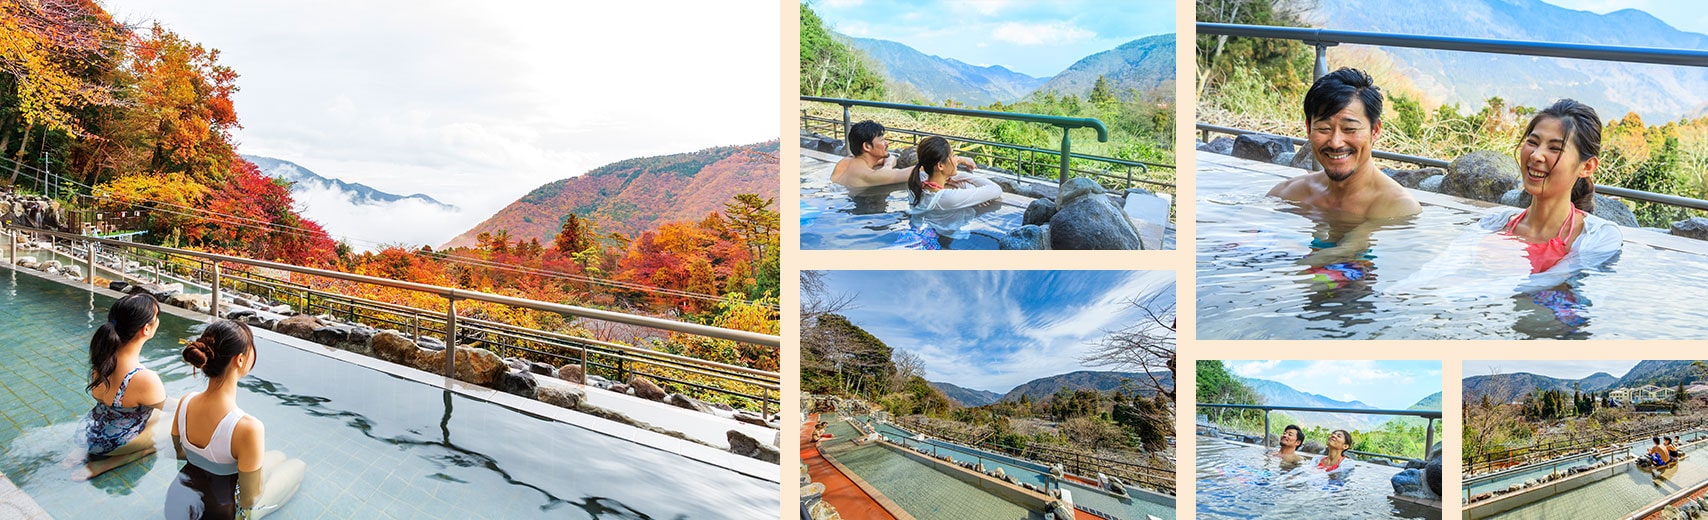 Spas And Baths [official]hakone Kowakien Yunessun Welcome To Hot Spring Paradise